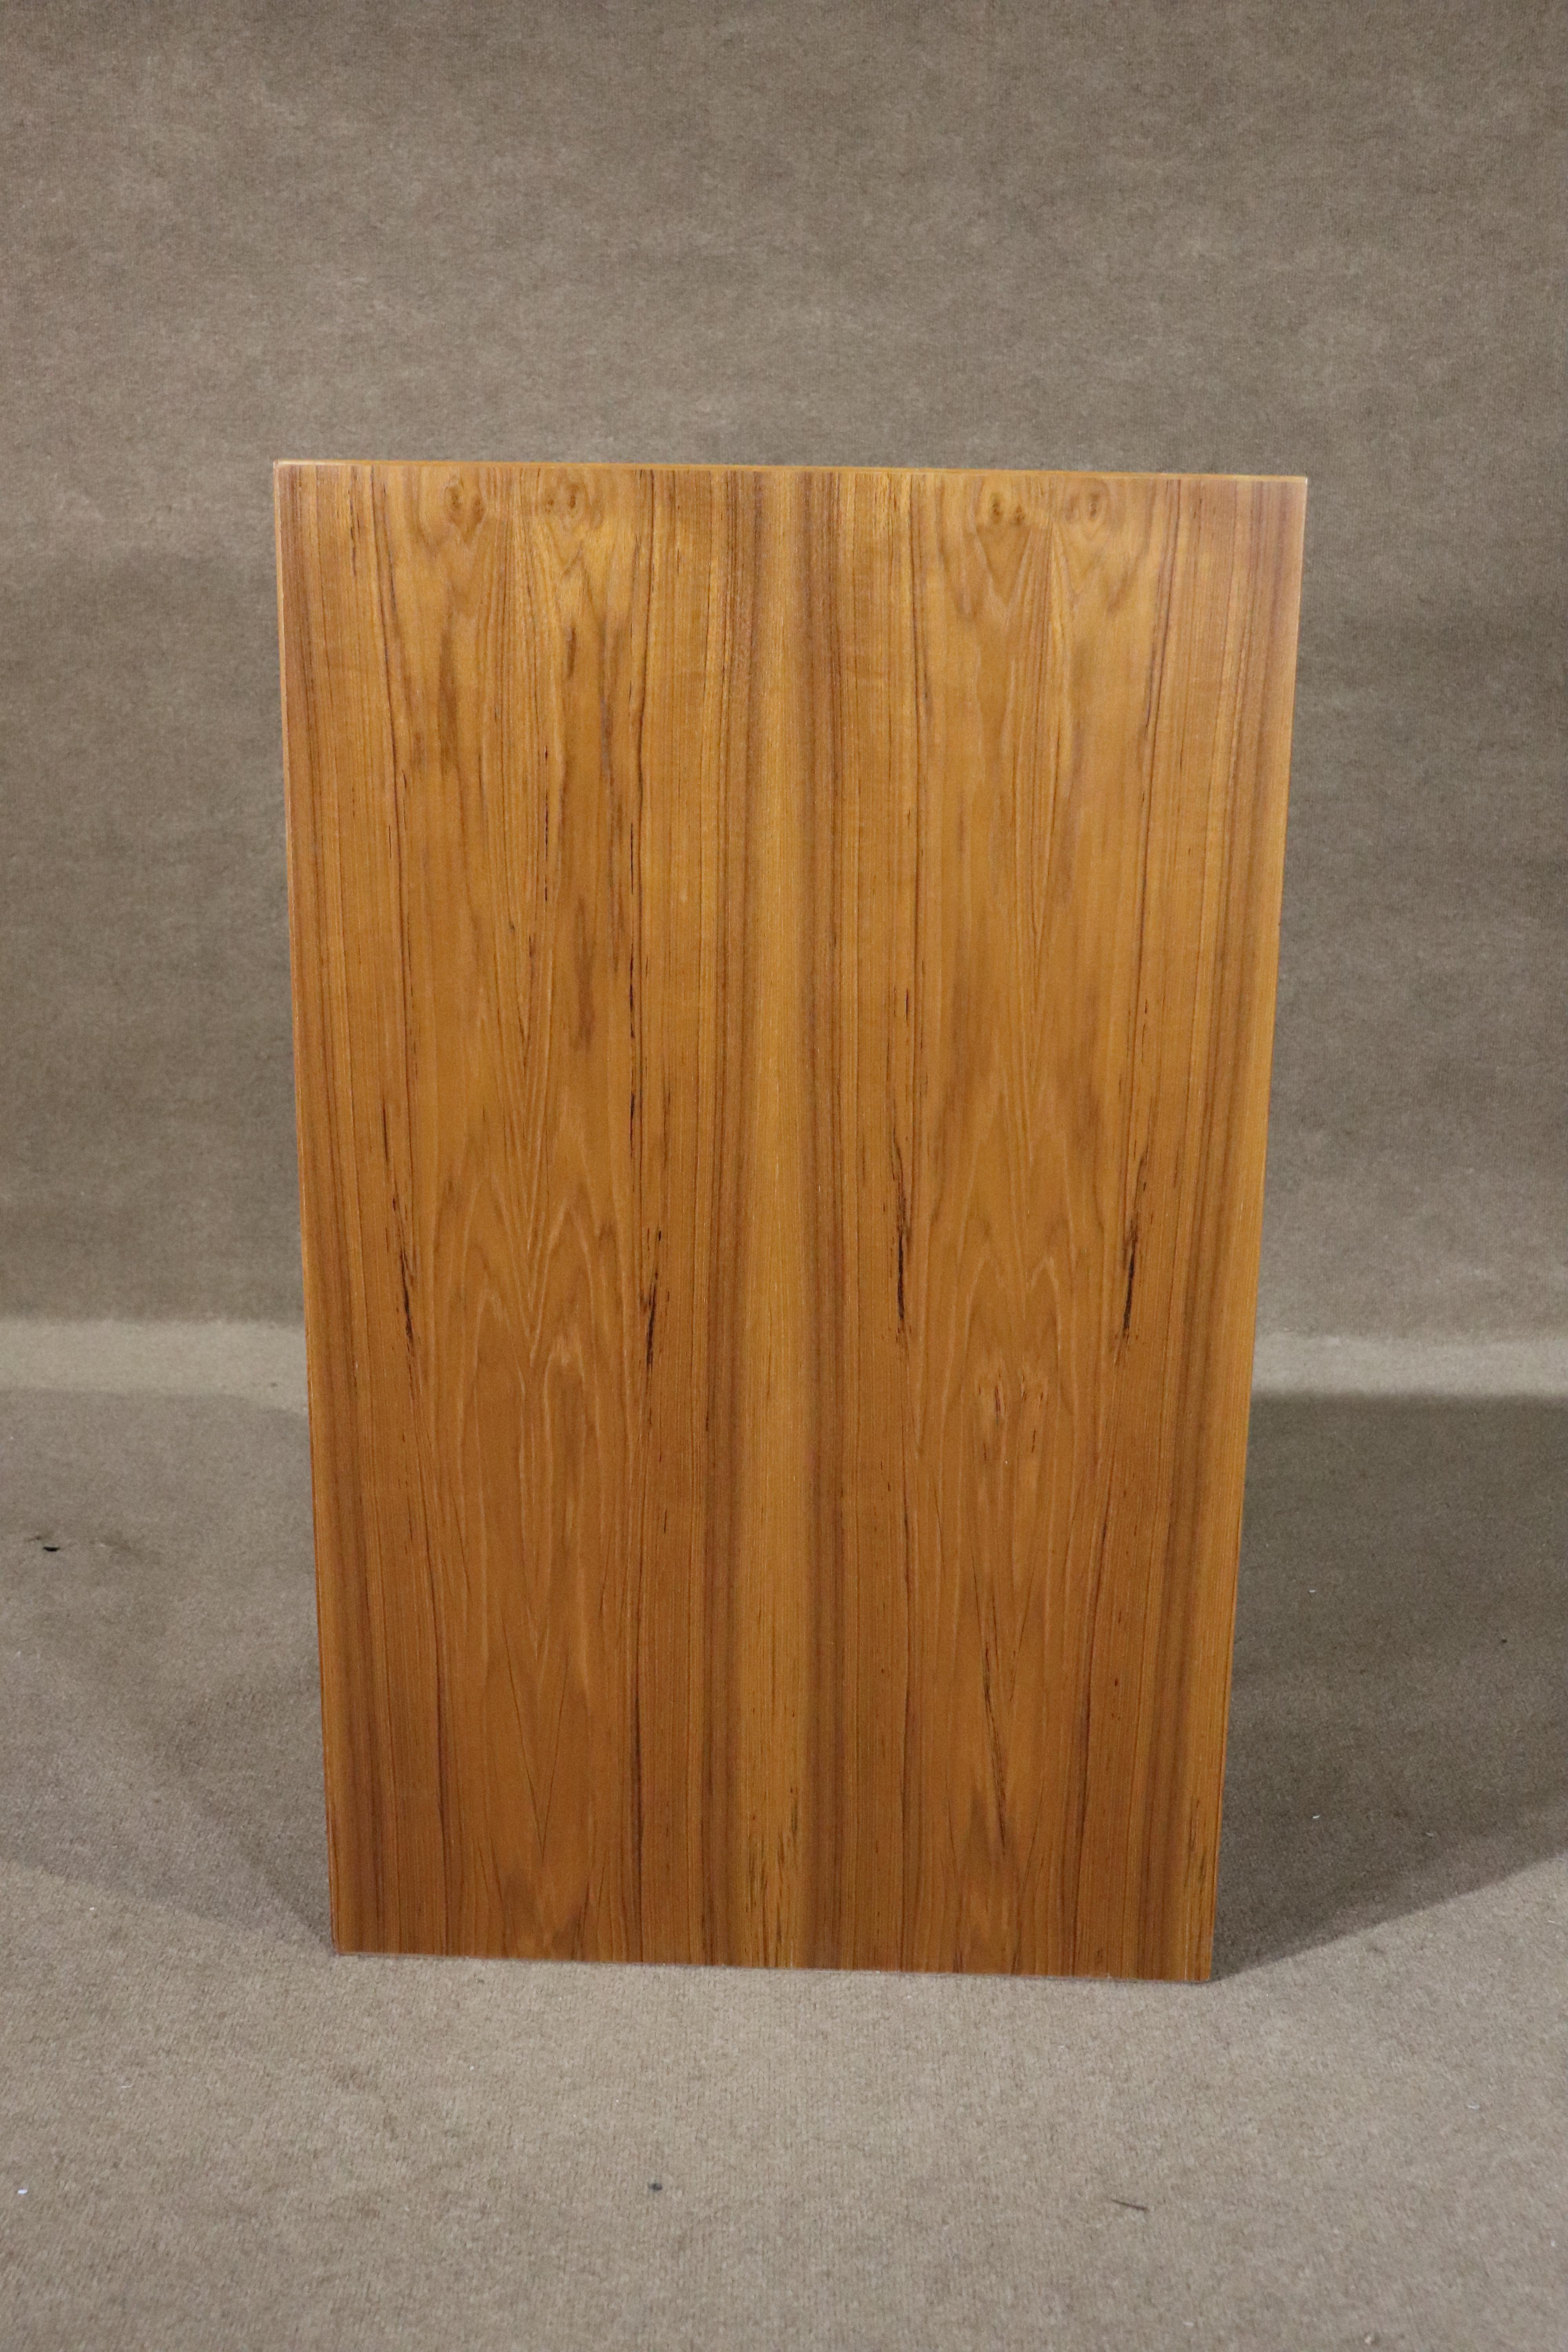 Teak File Cabinet In Good Condition For Sale In Brooklyn, NY